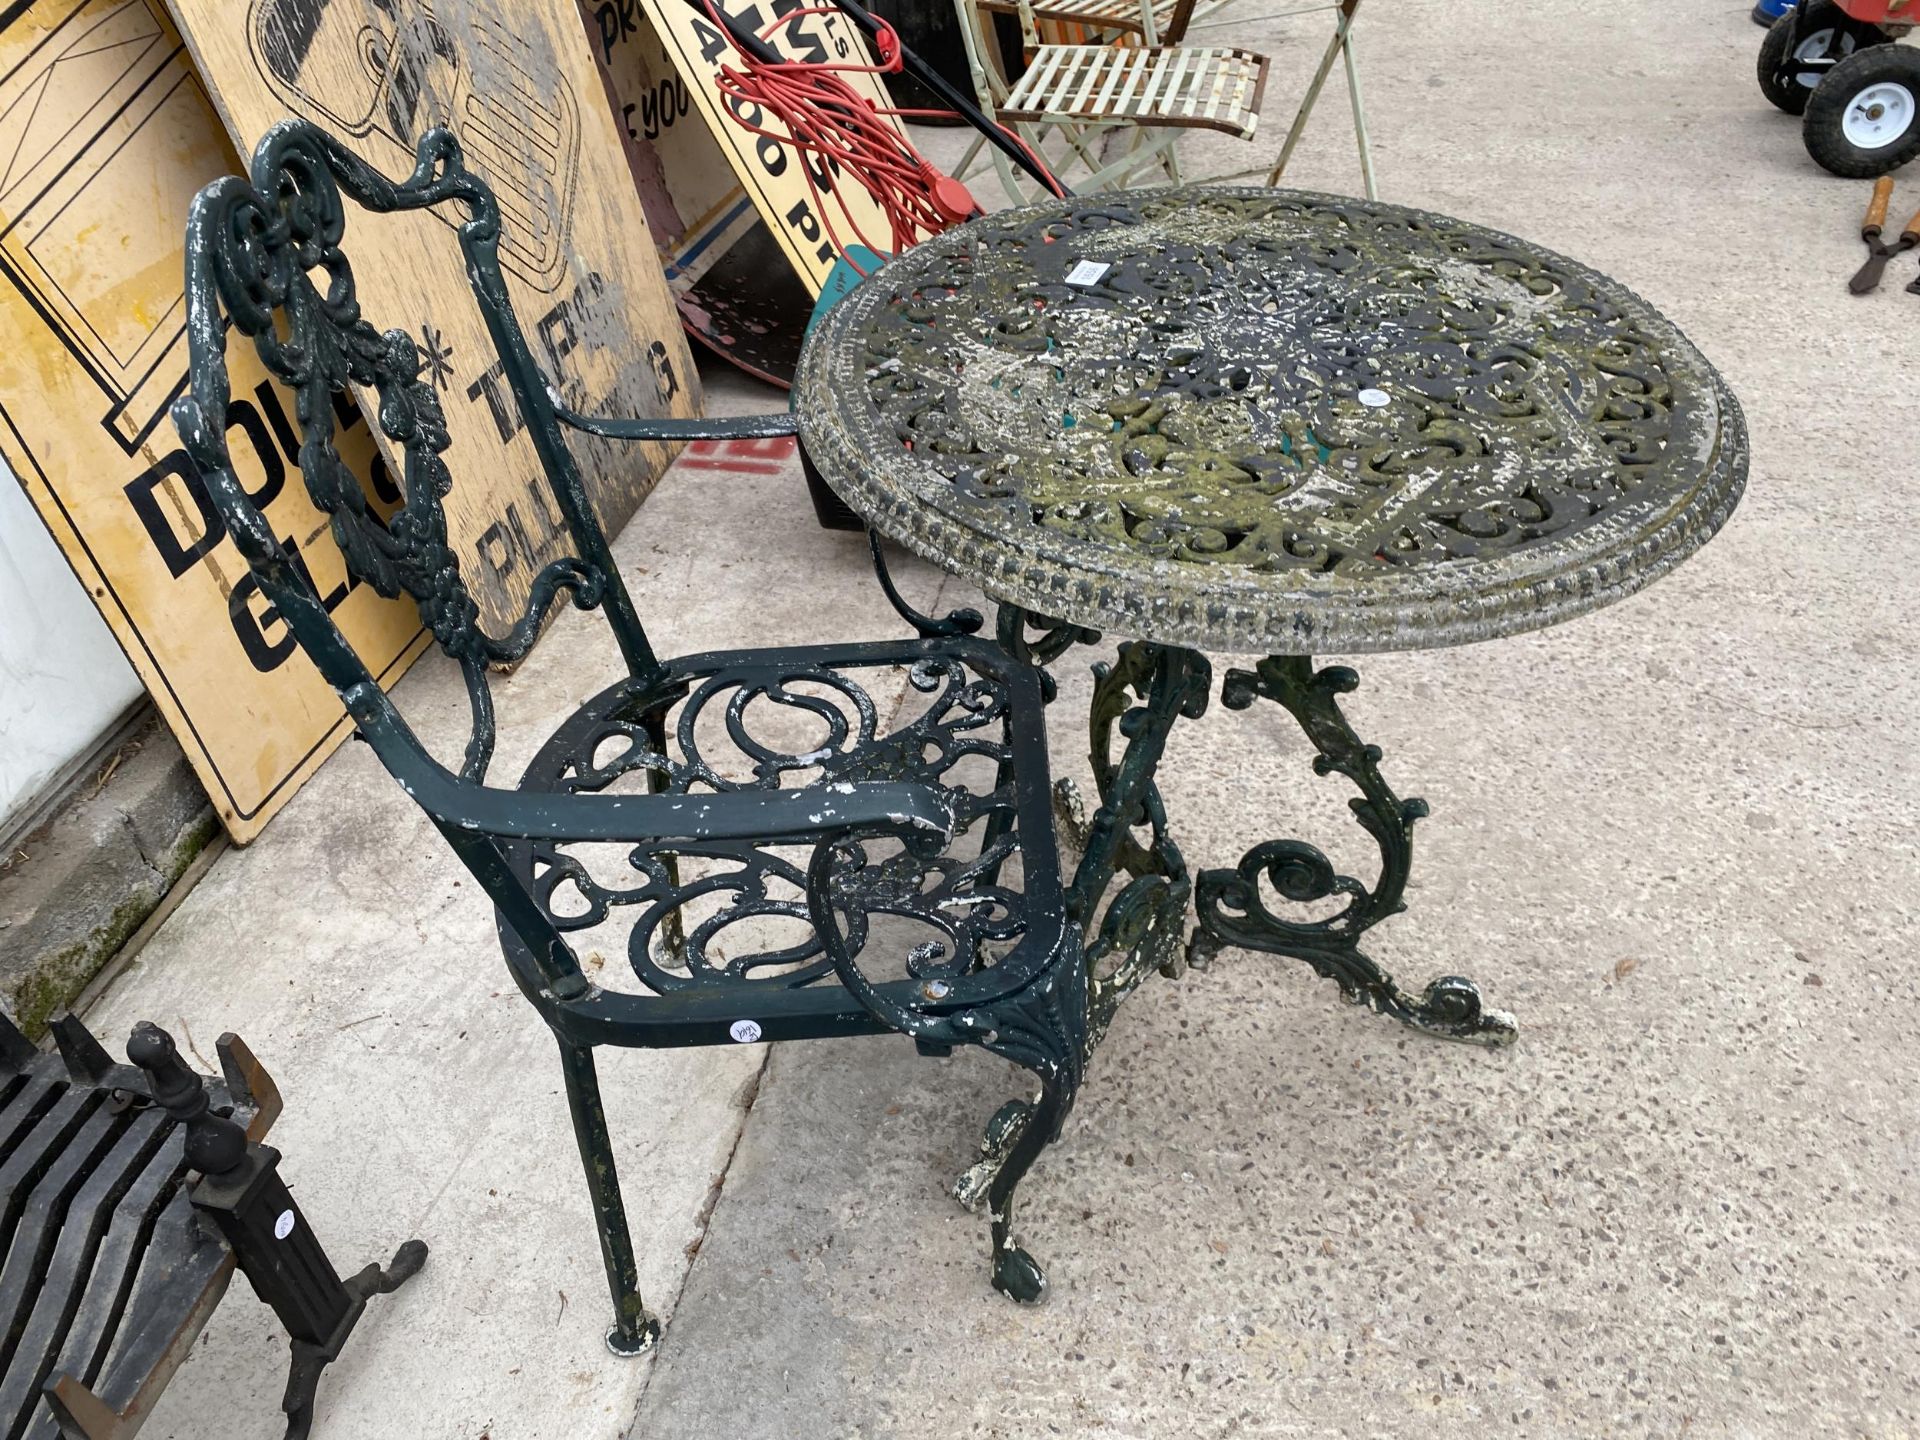 A DECORATIVE VINTAGE CAST IRON BISTRO TABLE AND A CAST ALLOY BISTRO CHAIR - Image 2 of 3